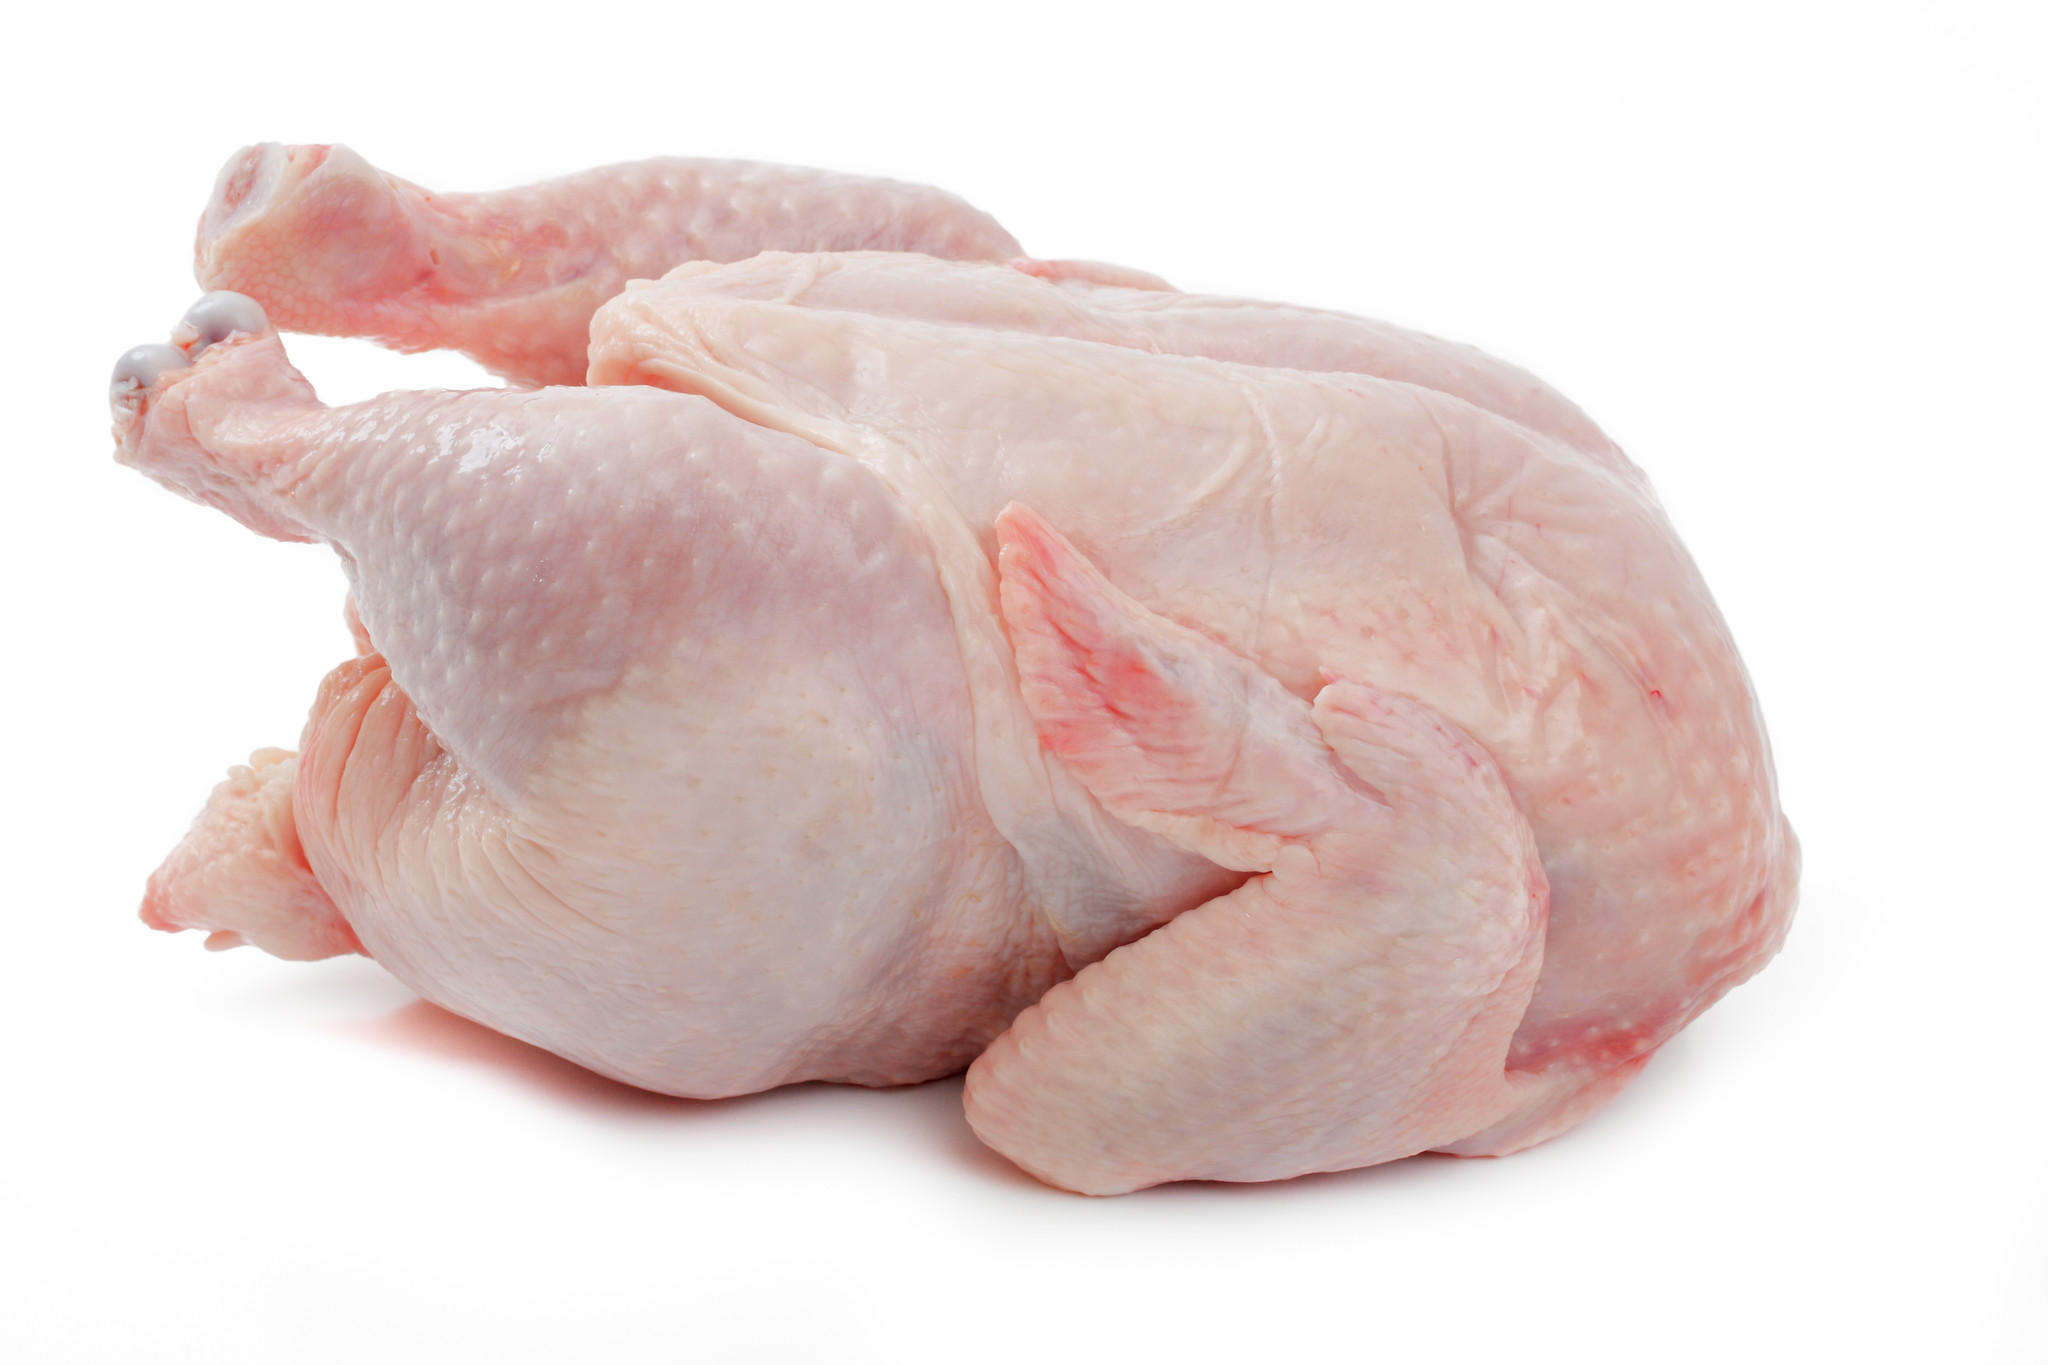 Poultry meat